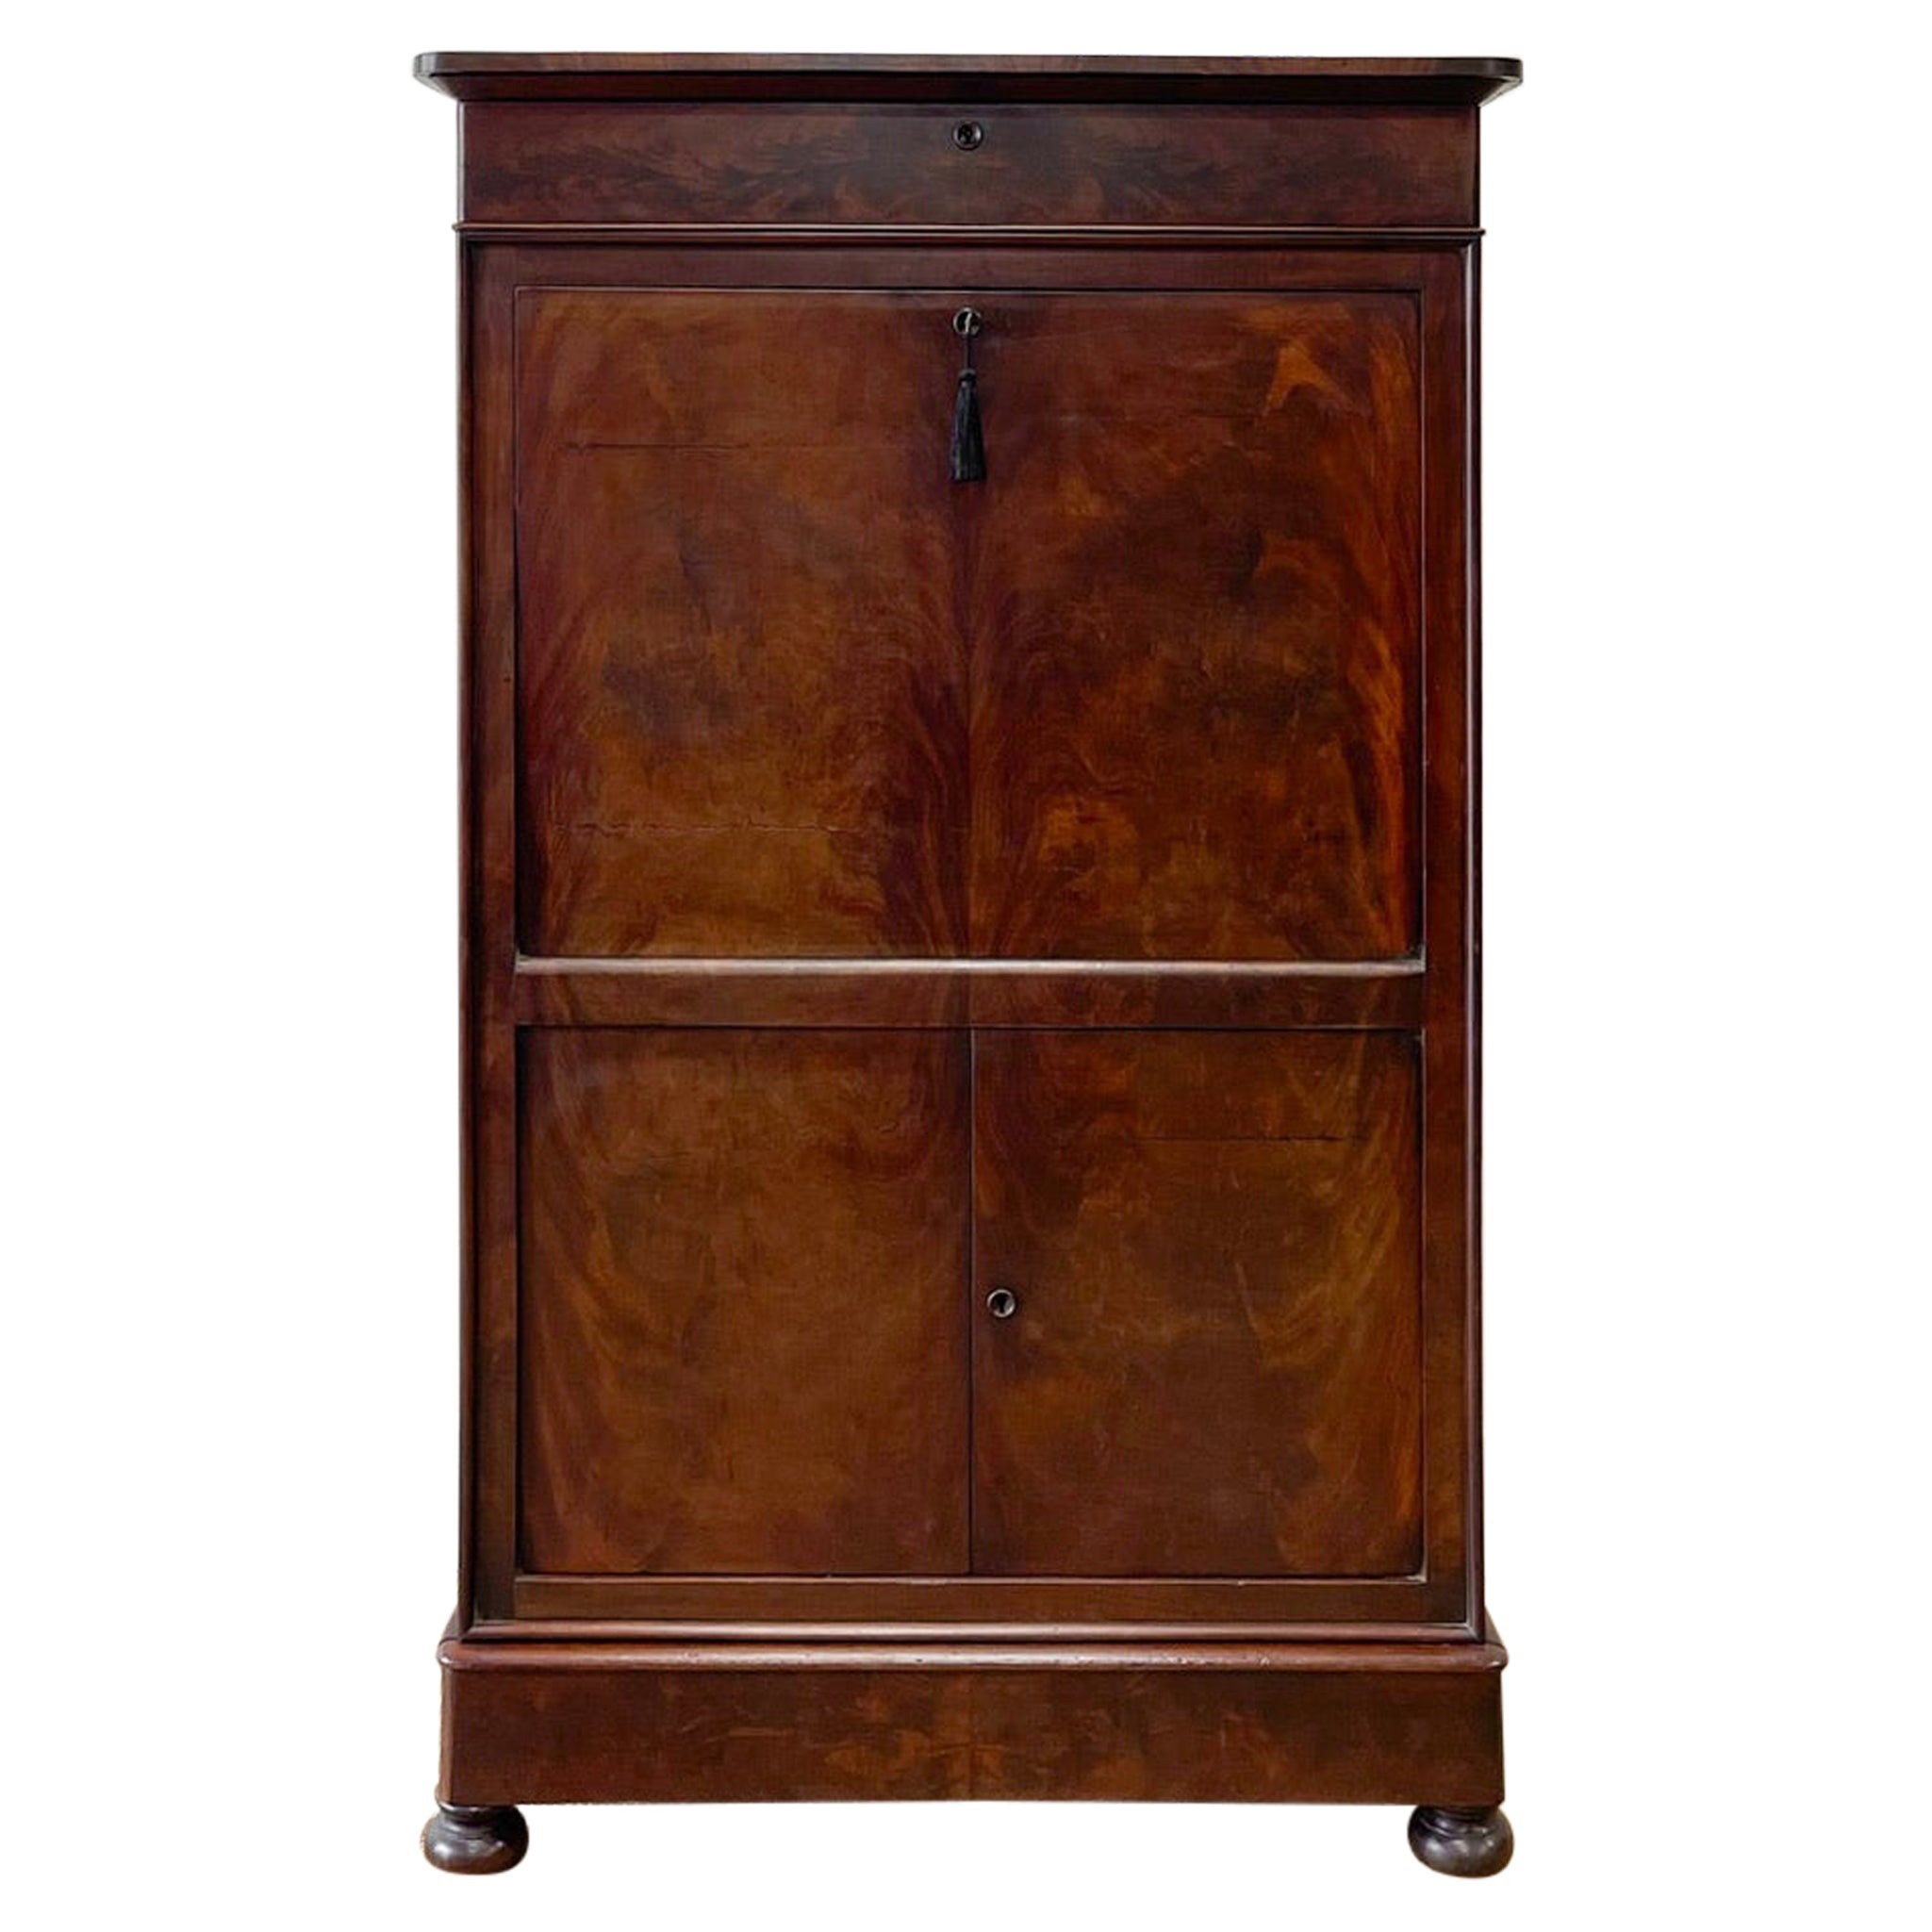 A Sophisticated Antique French Louis Phillipe Secretary